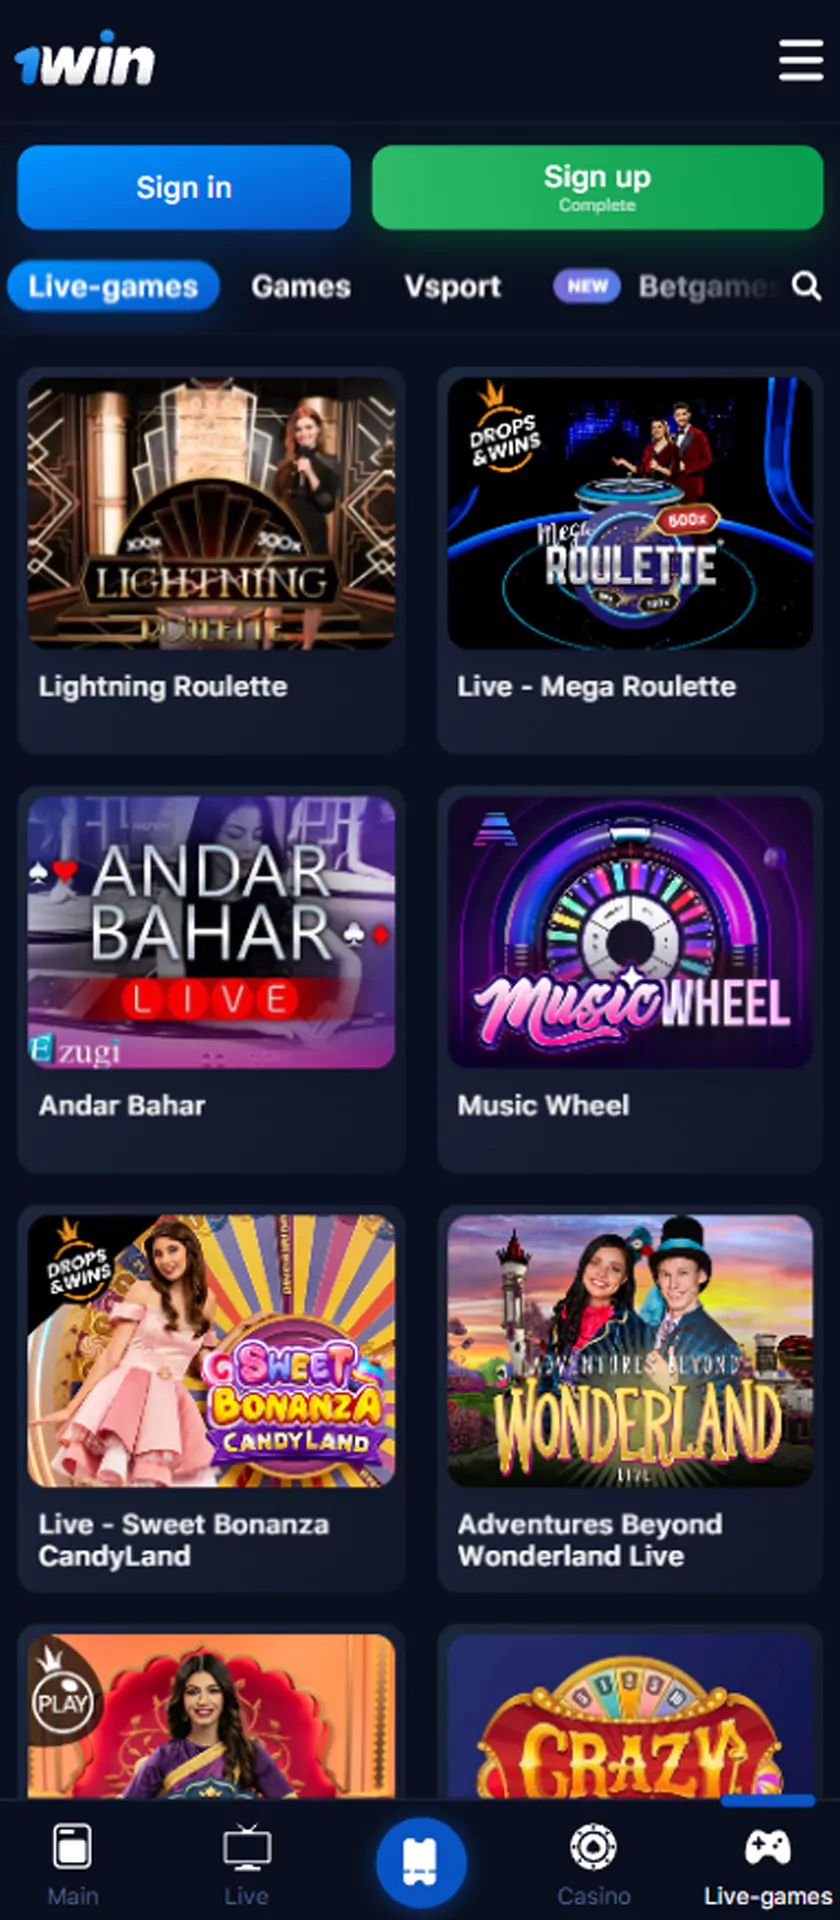 1win app live casino section.